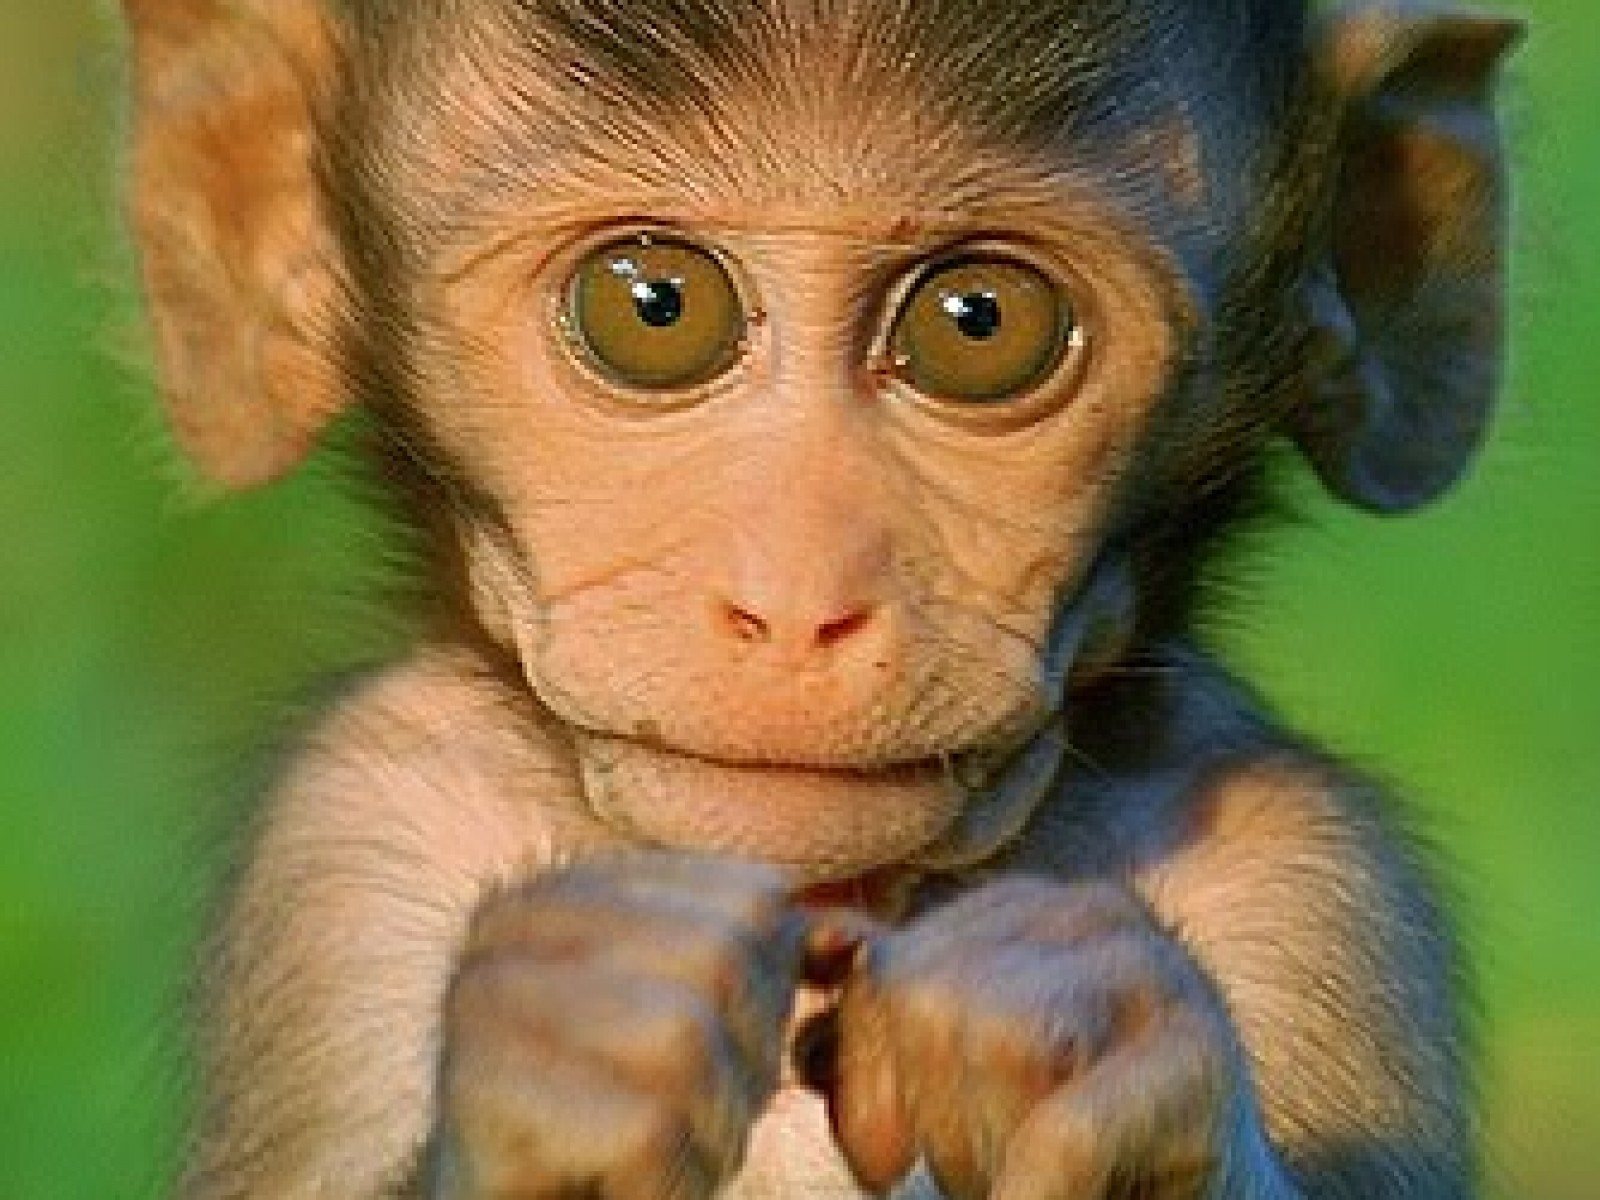 Cute Baby Monkey Wallpapers Images amp Pictures   Becuo